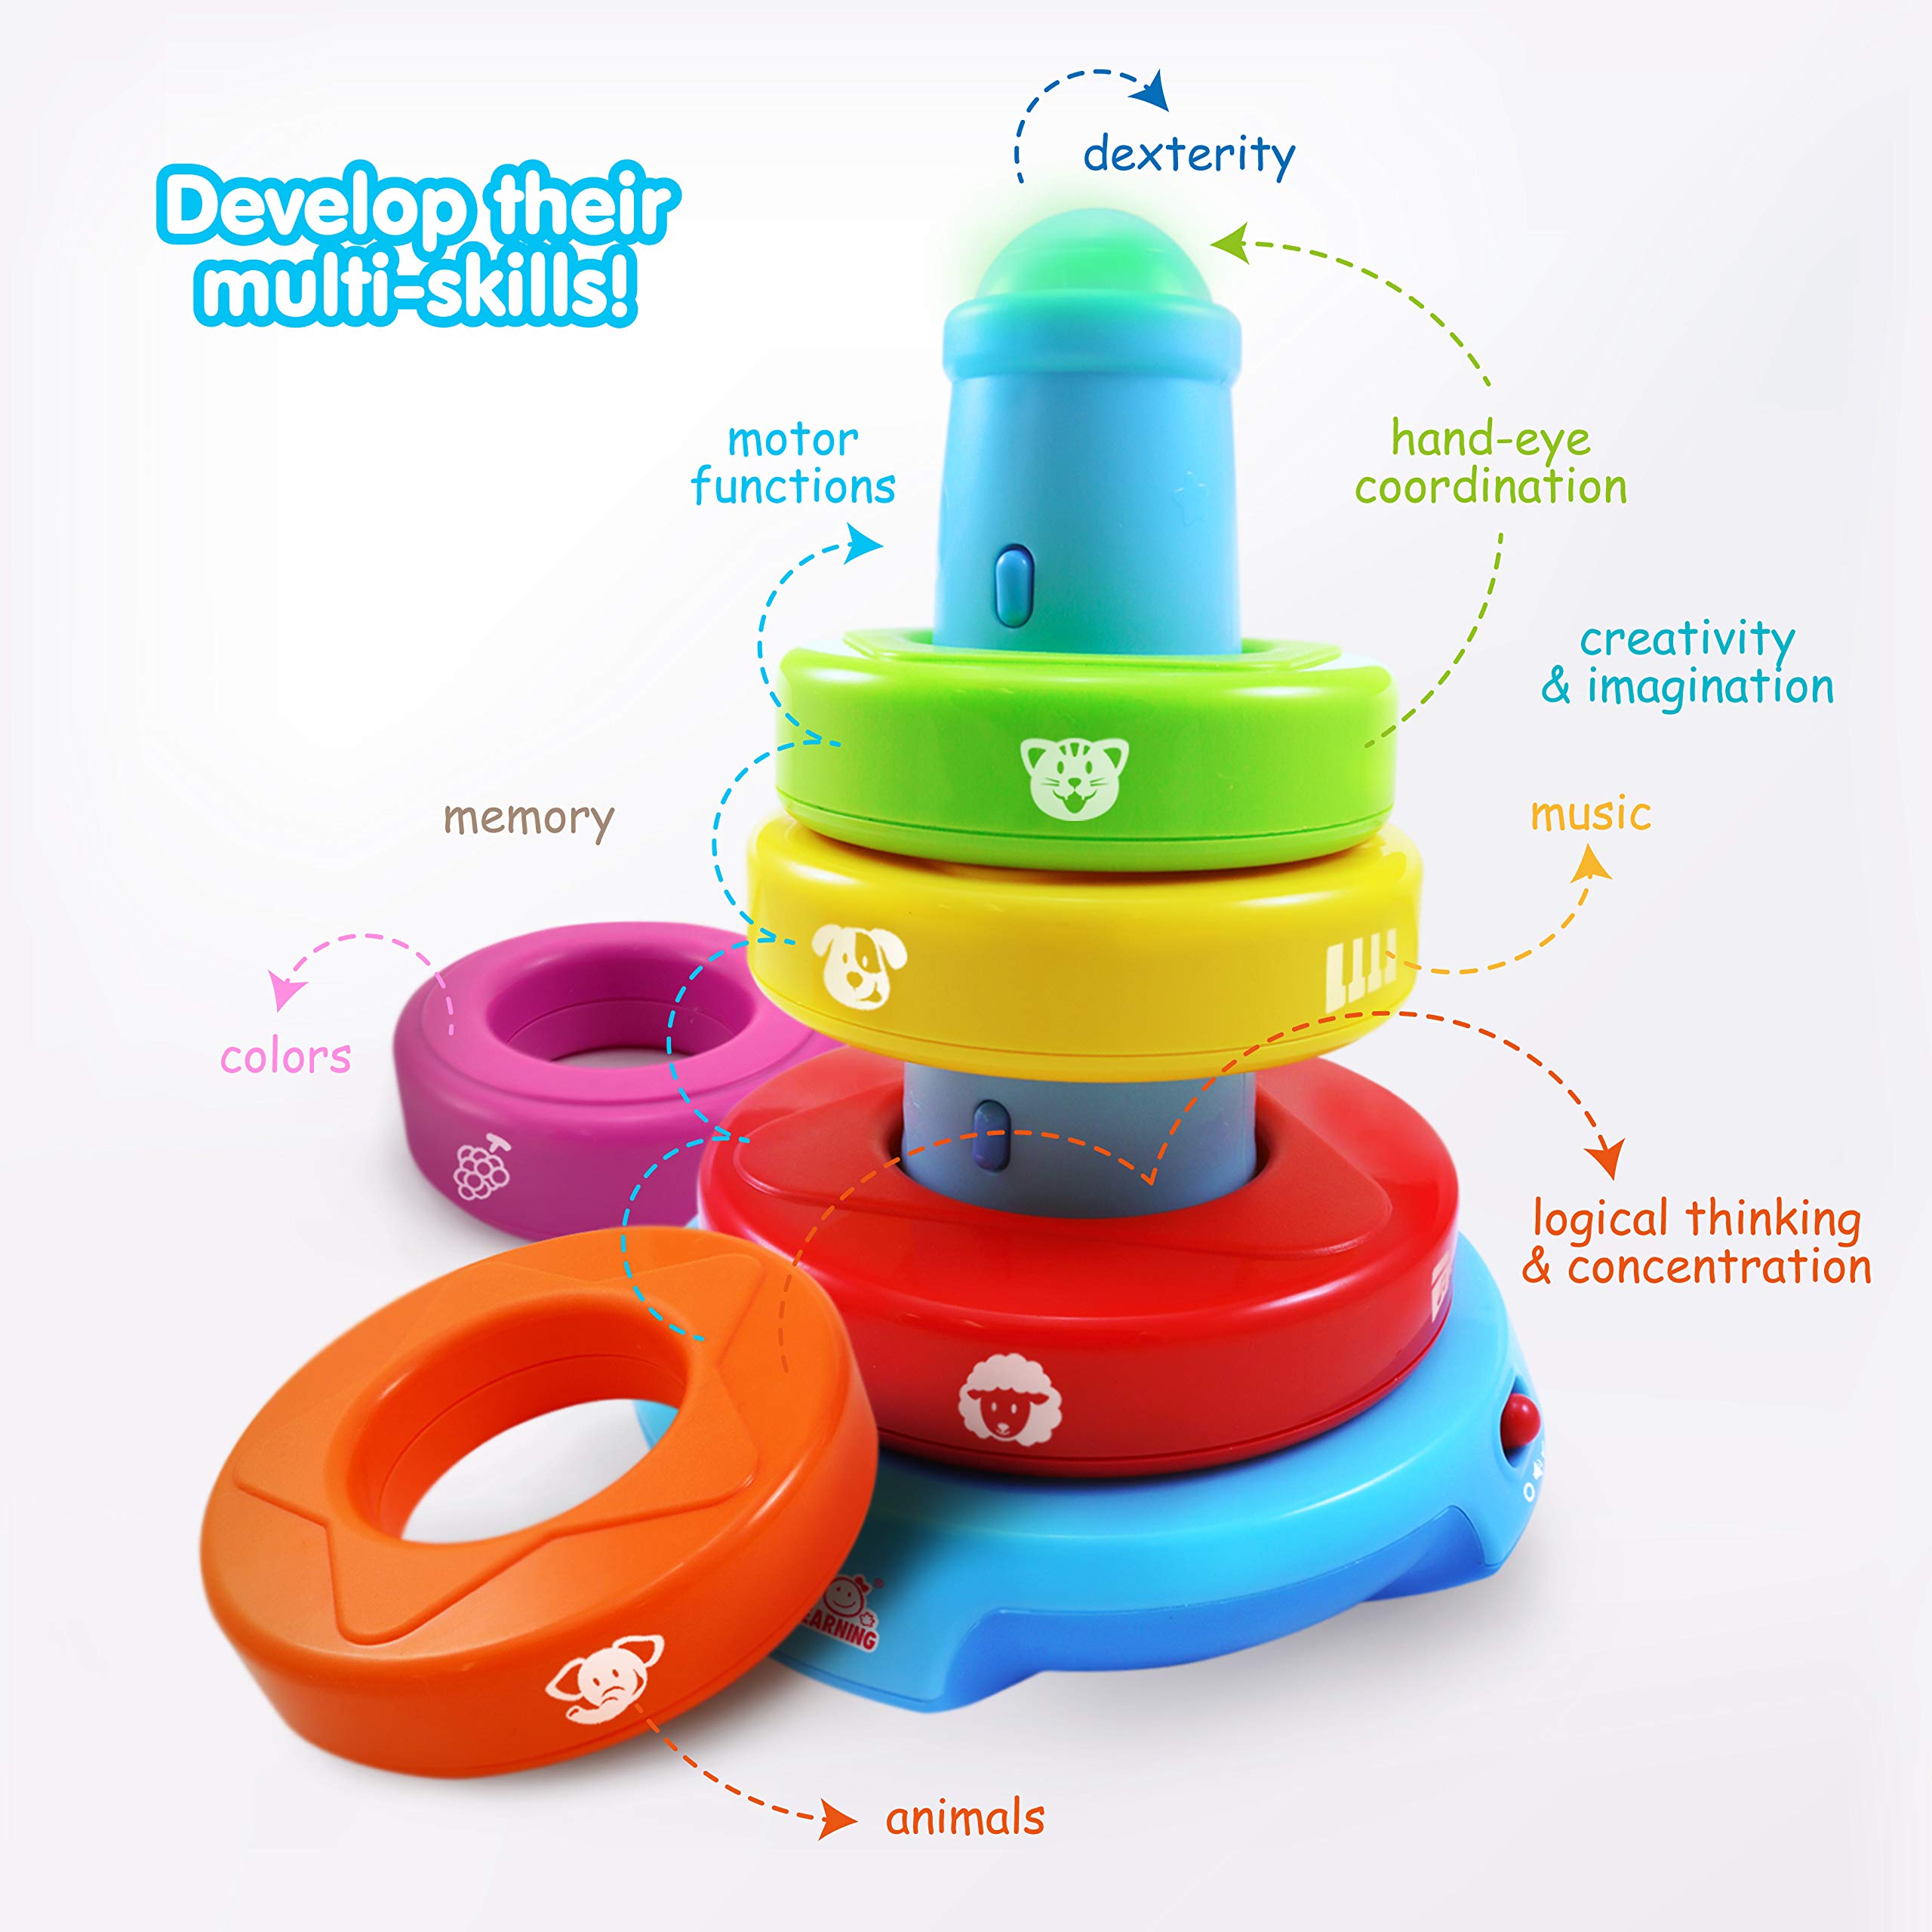 BEST LEARNING Stack & Learn - Developmental Educational Activity Stacking Toy for Infants Babies Toddlers for 6 or 9 Month Old Baby Toys and Up | First 1 Year Boy Girl Birthday Present